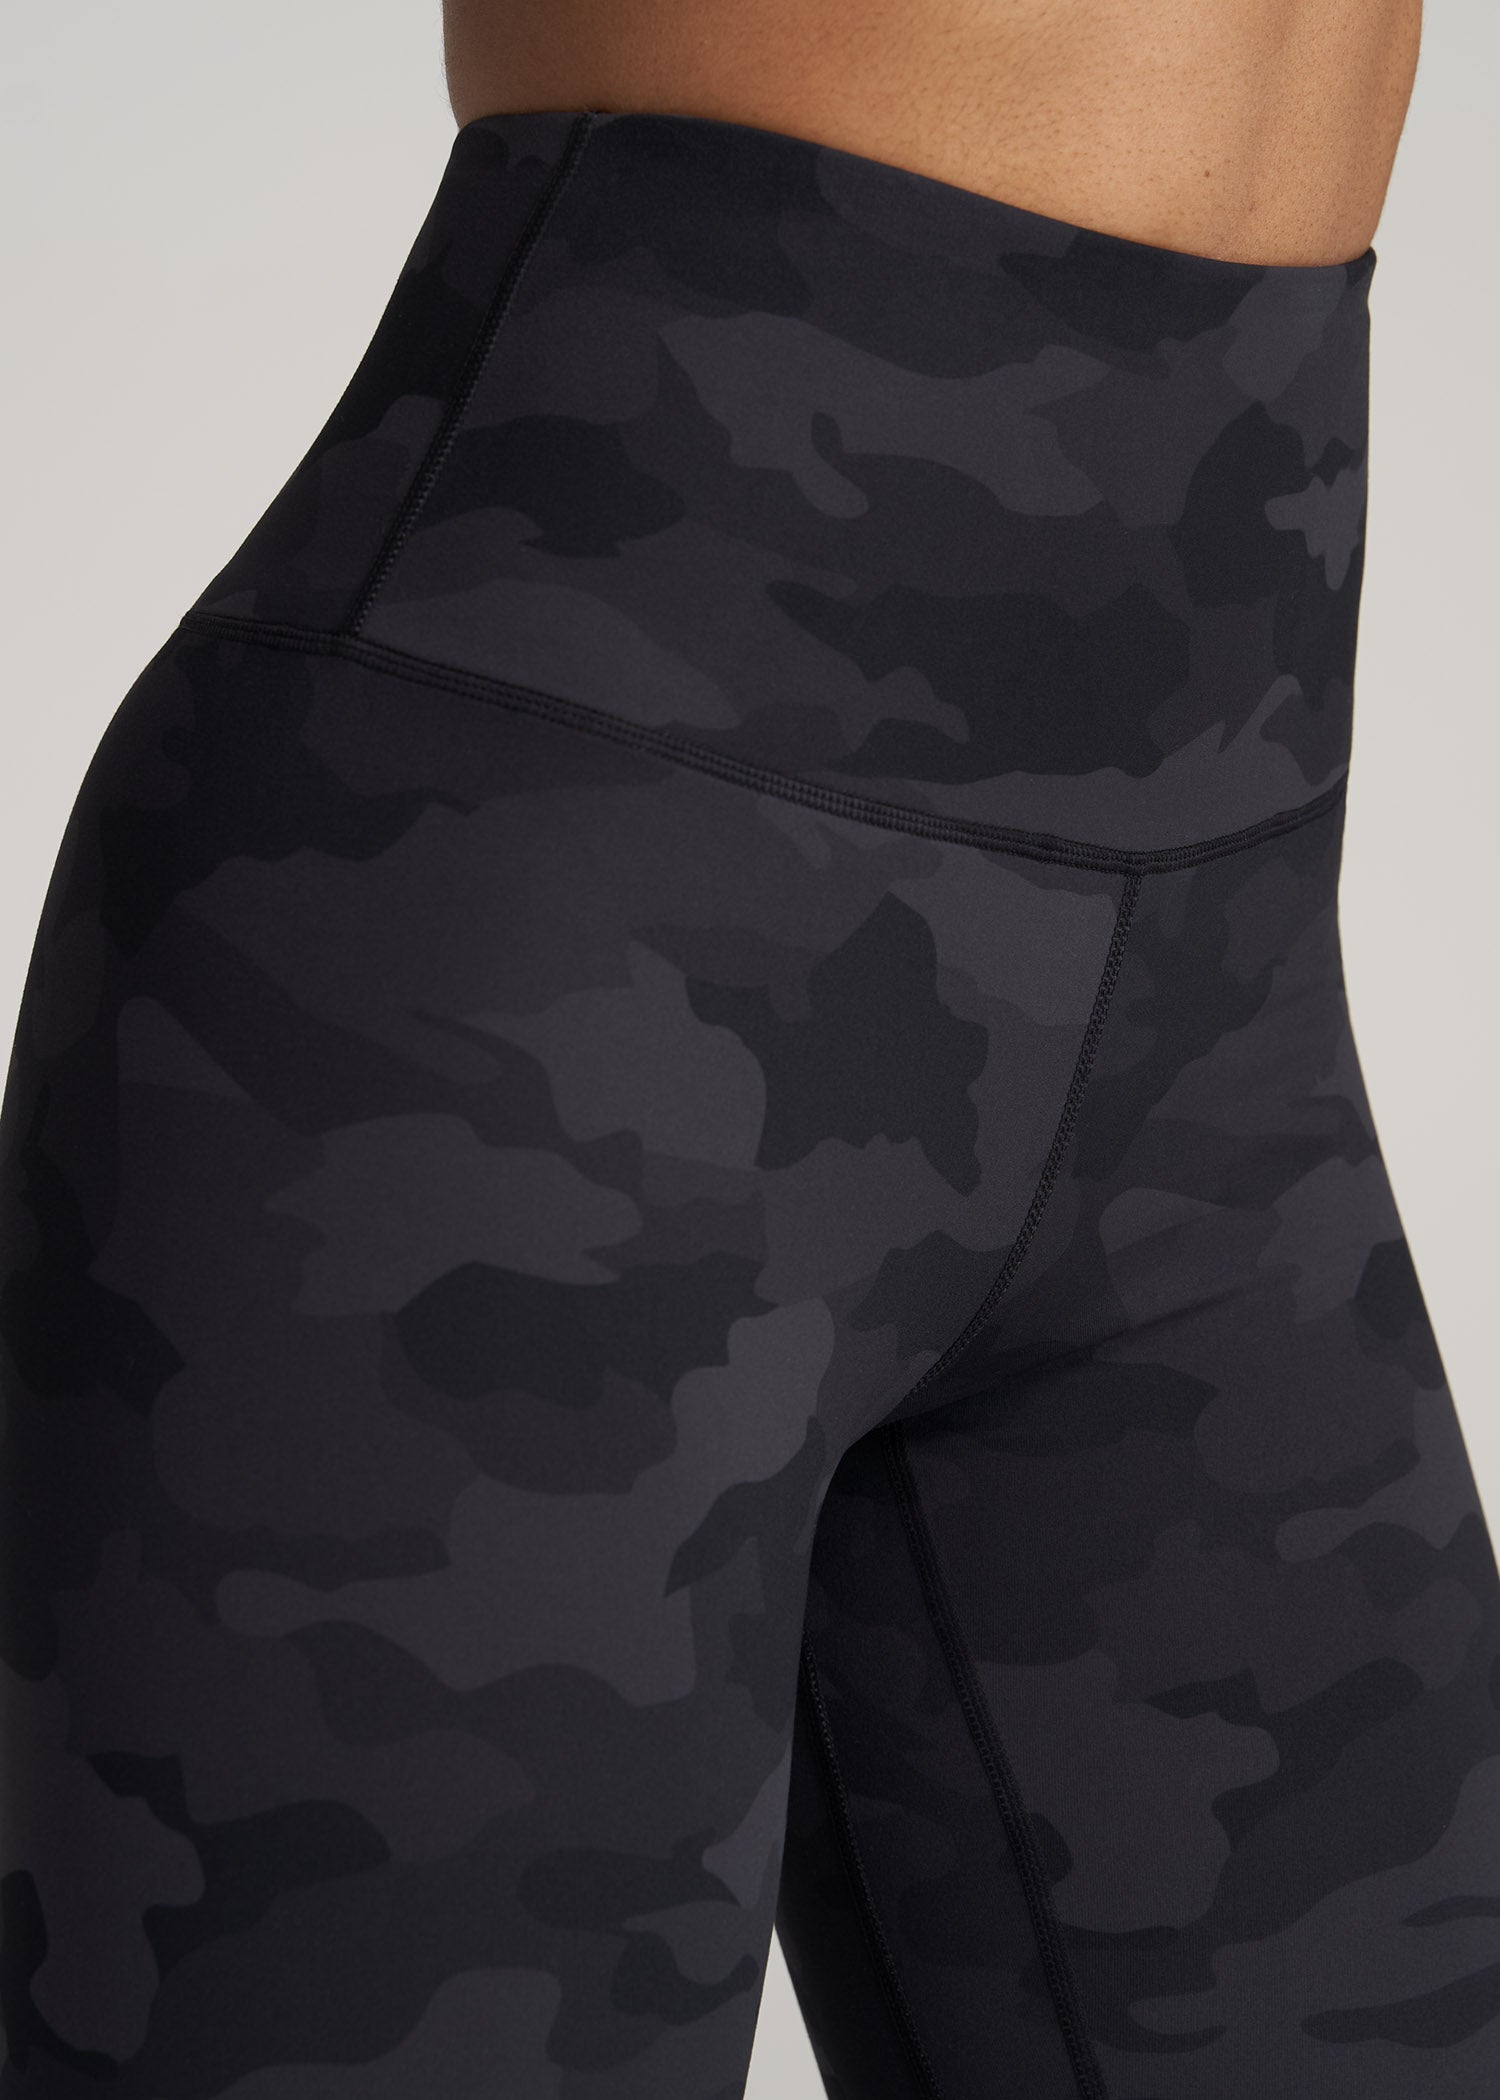 AT Balance High-Rise Leggings for Tall Women in Grey Camo